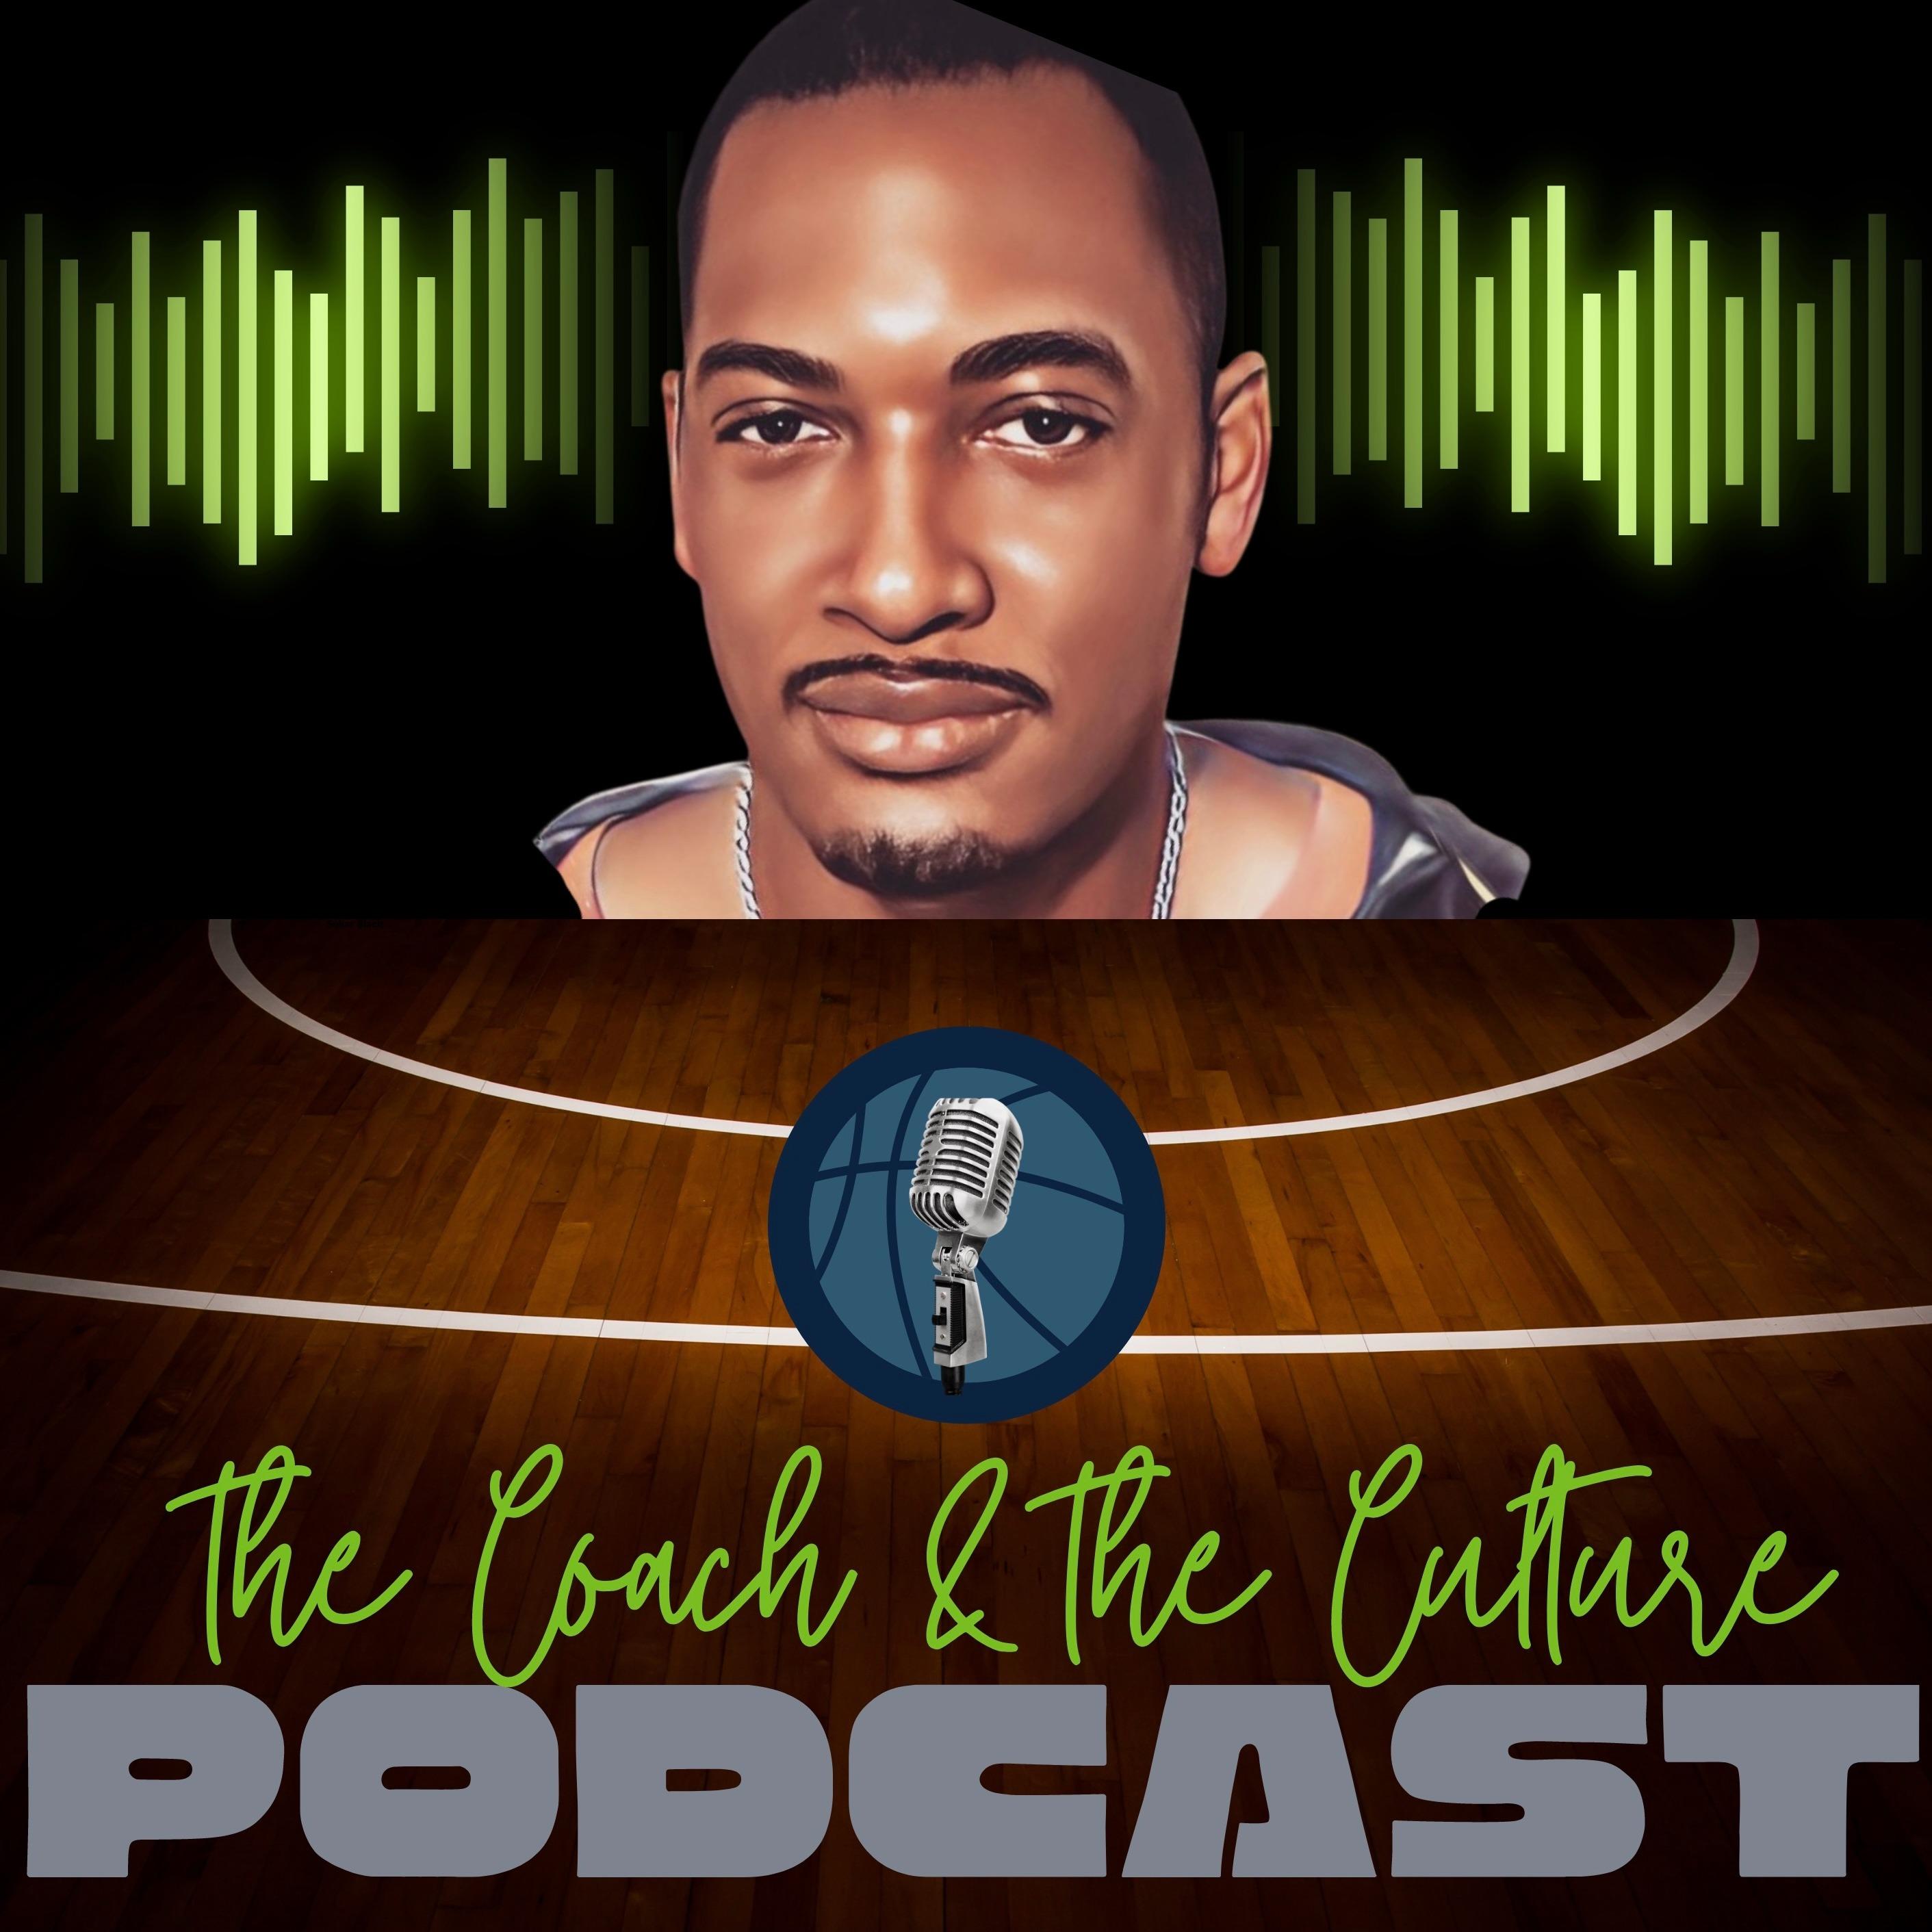 The Coach & The Culture (Formerly The Coach & The Crooner)